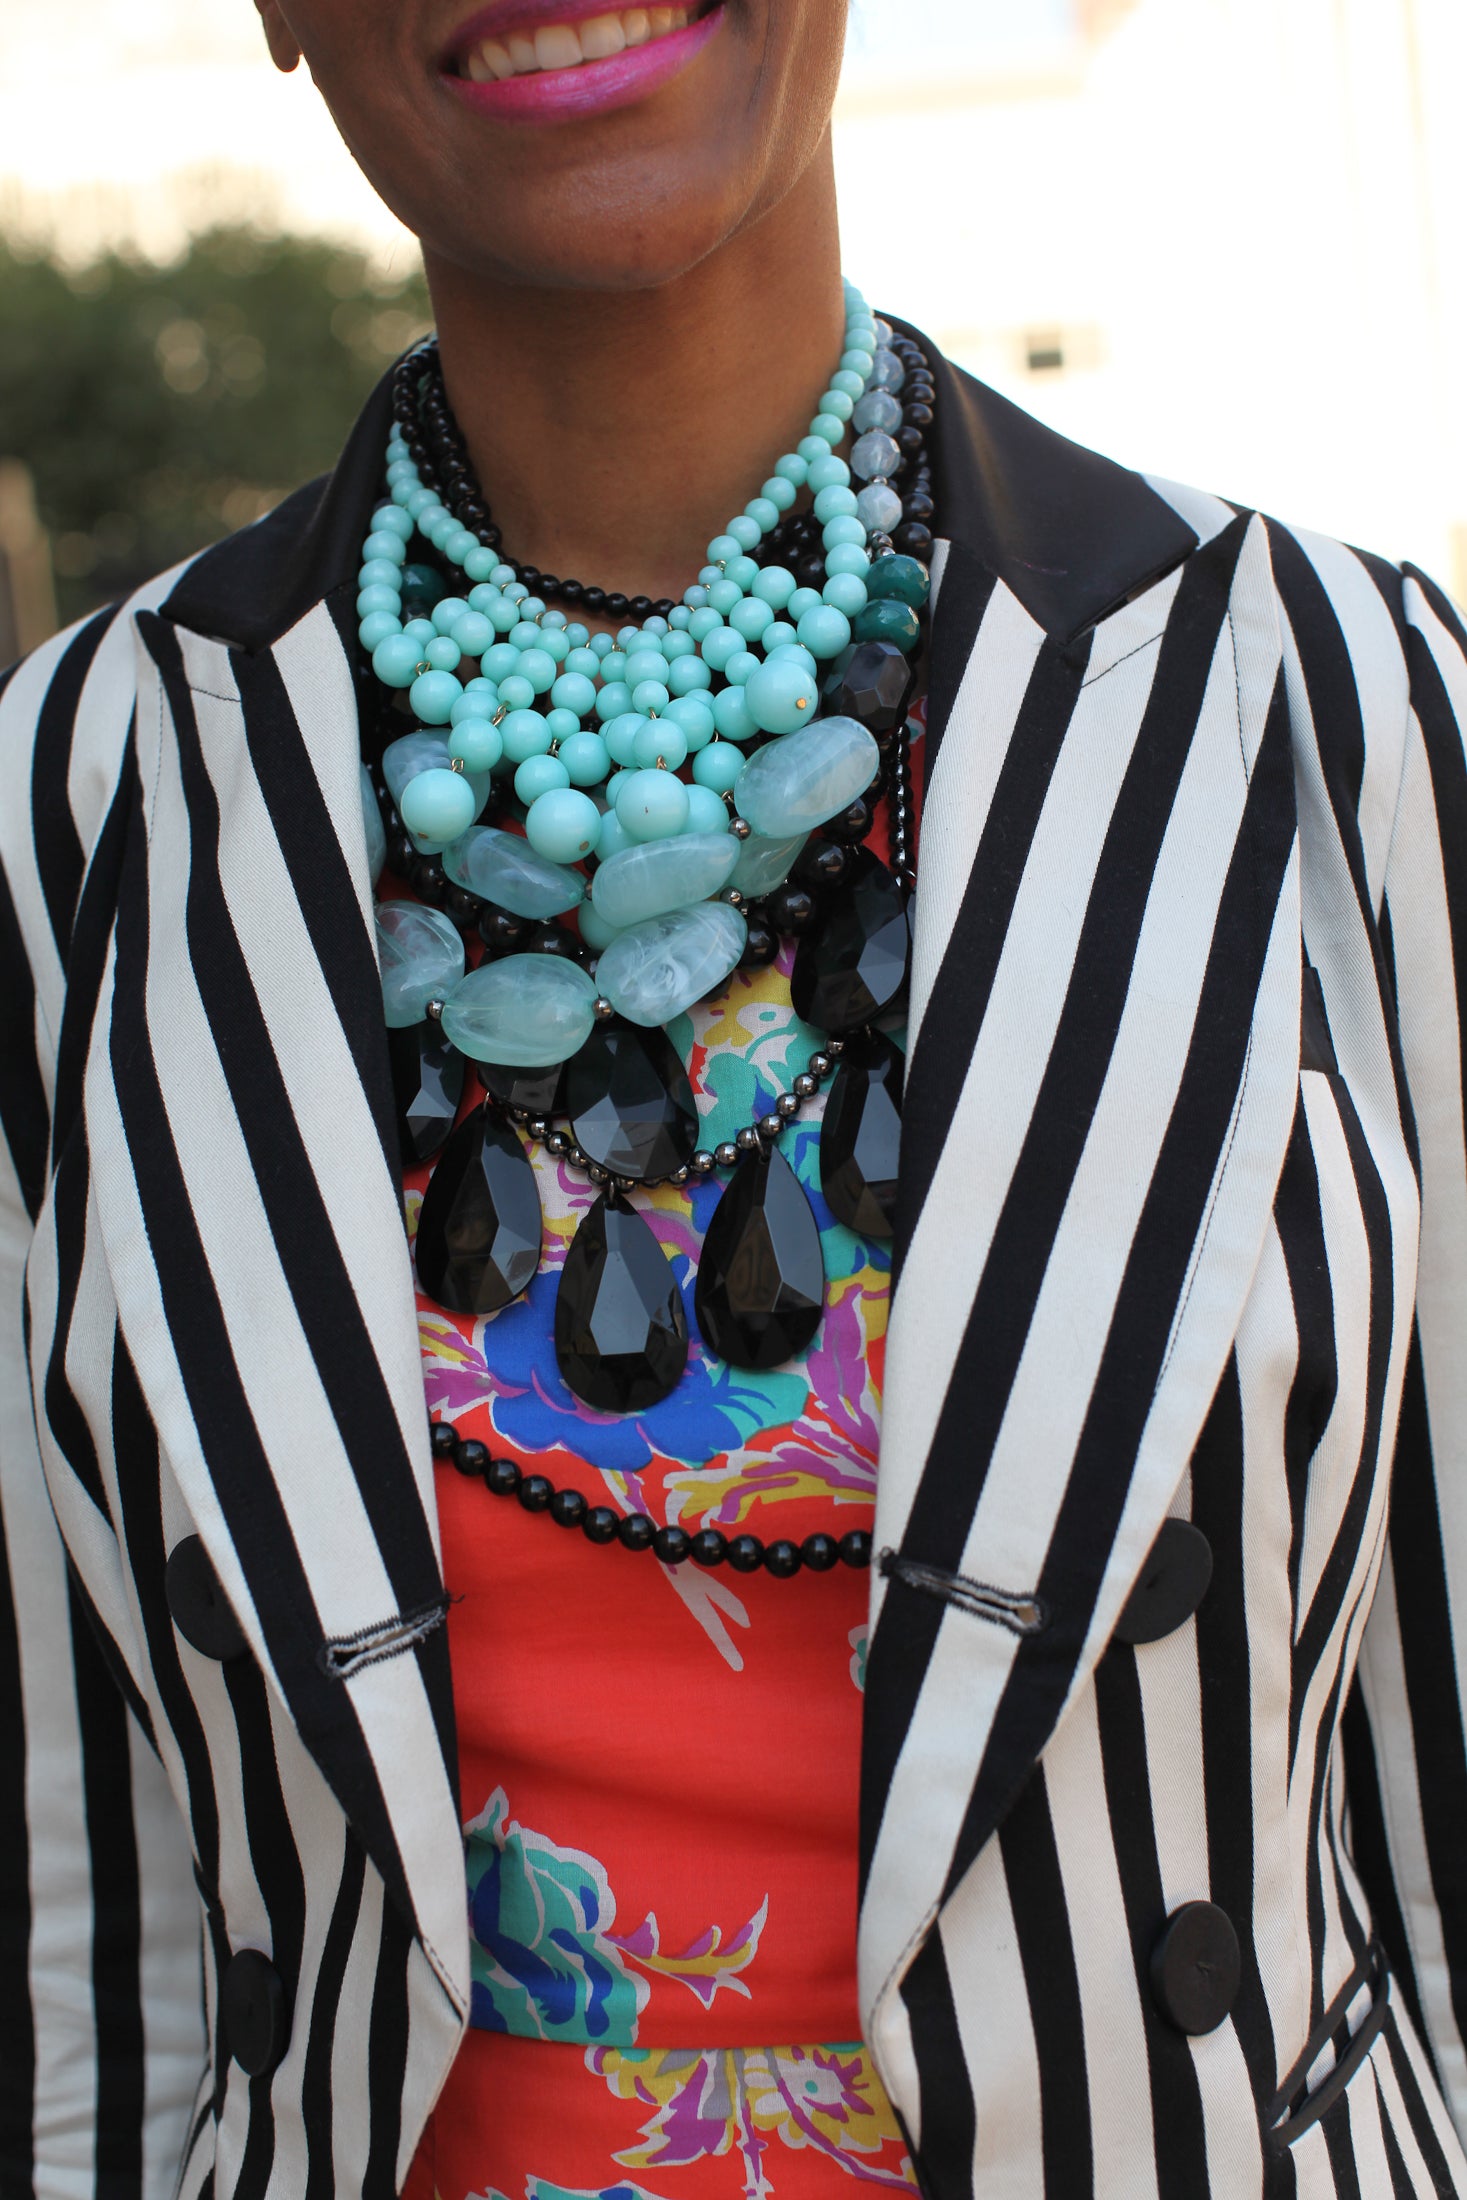 Accessories Street Style: Accessory Overload
